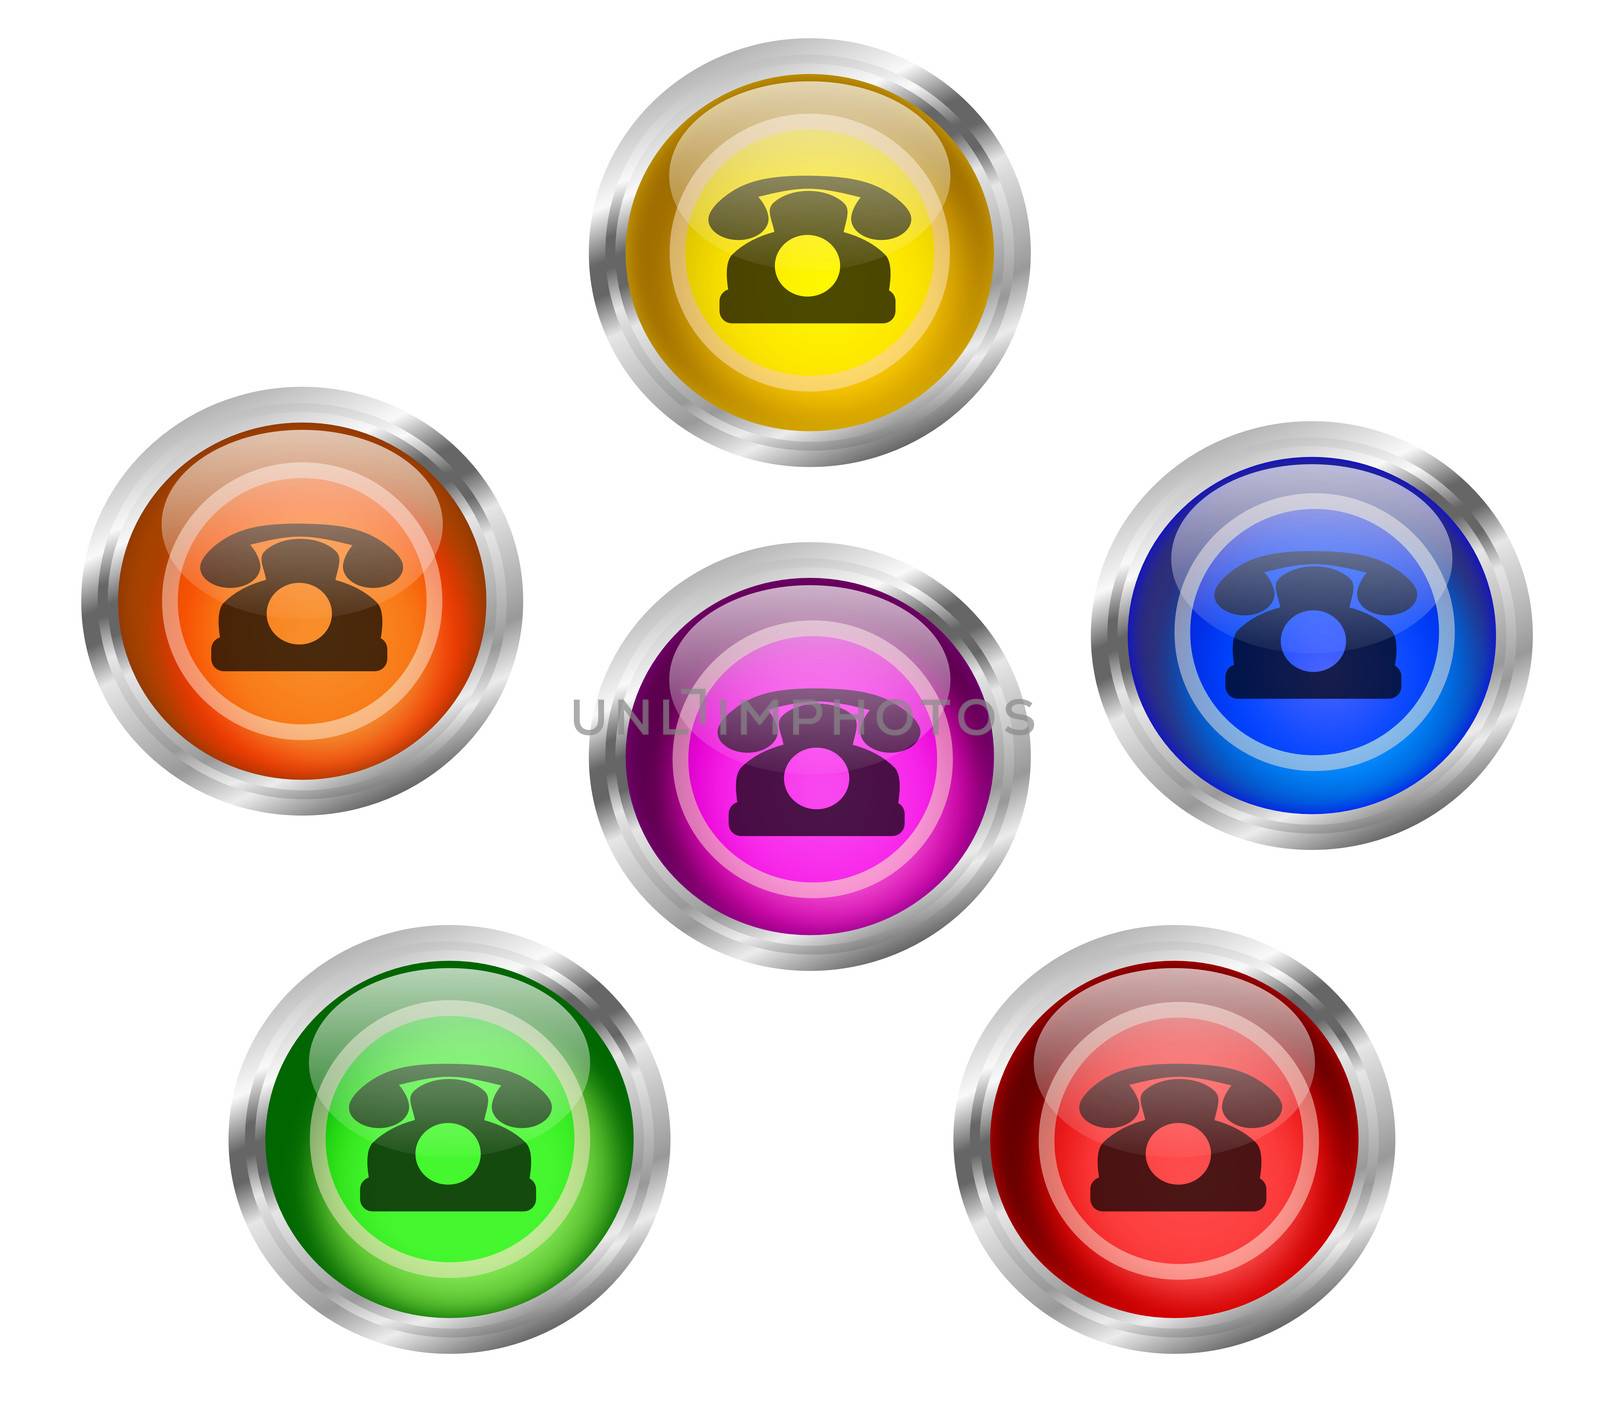 A set of shiny contact web buttons with telephone icon in different colors
